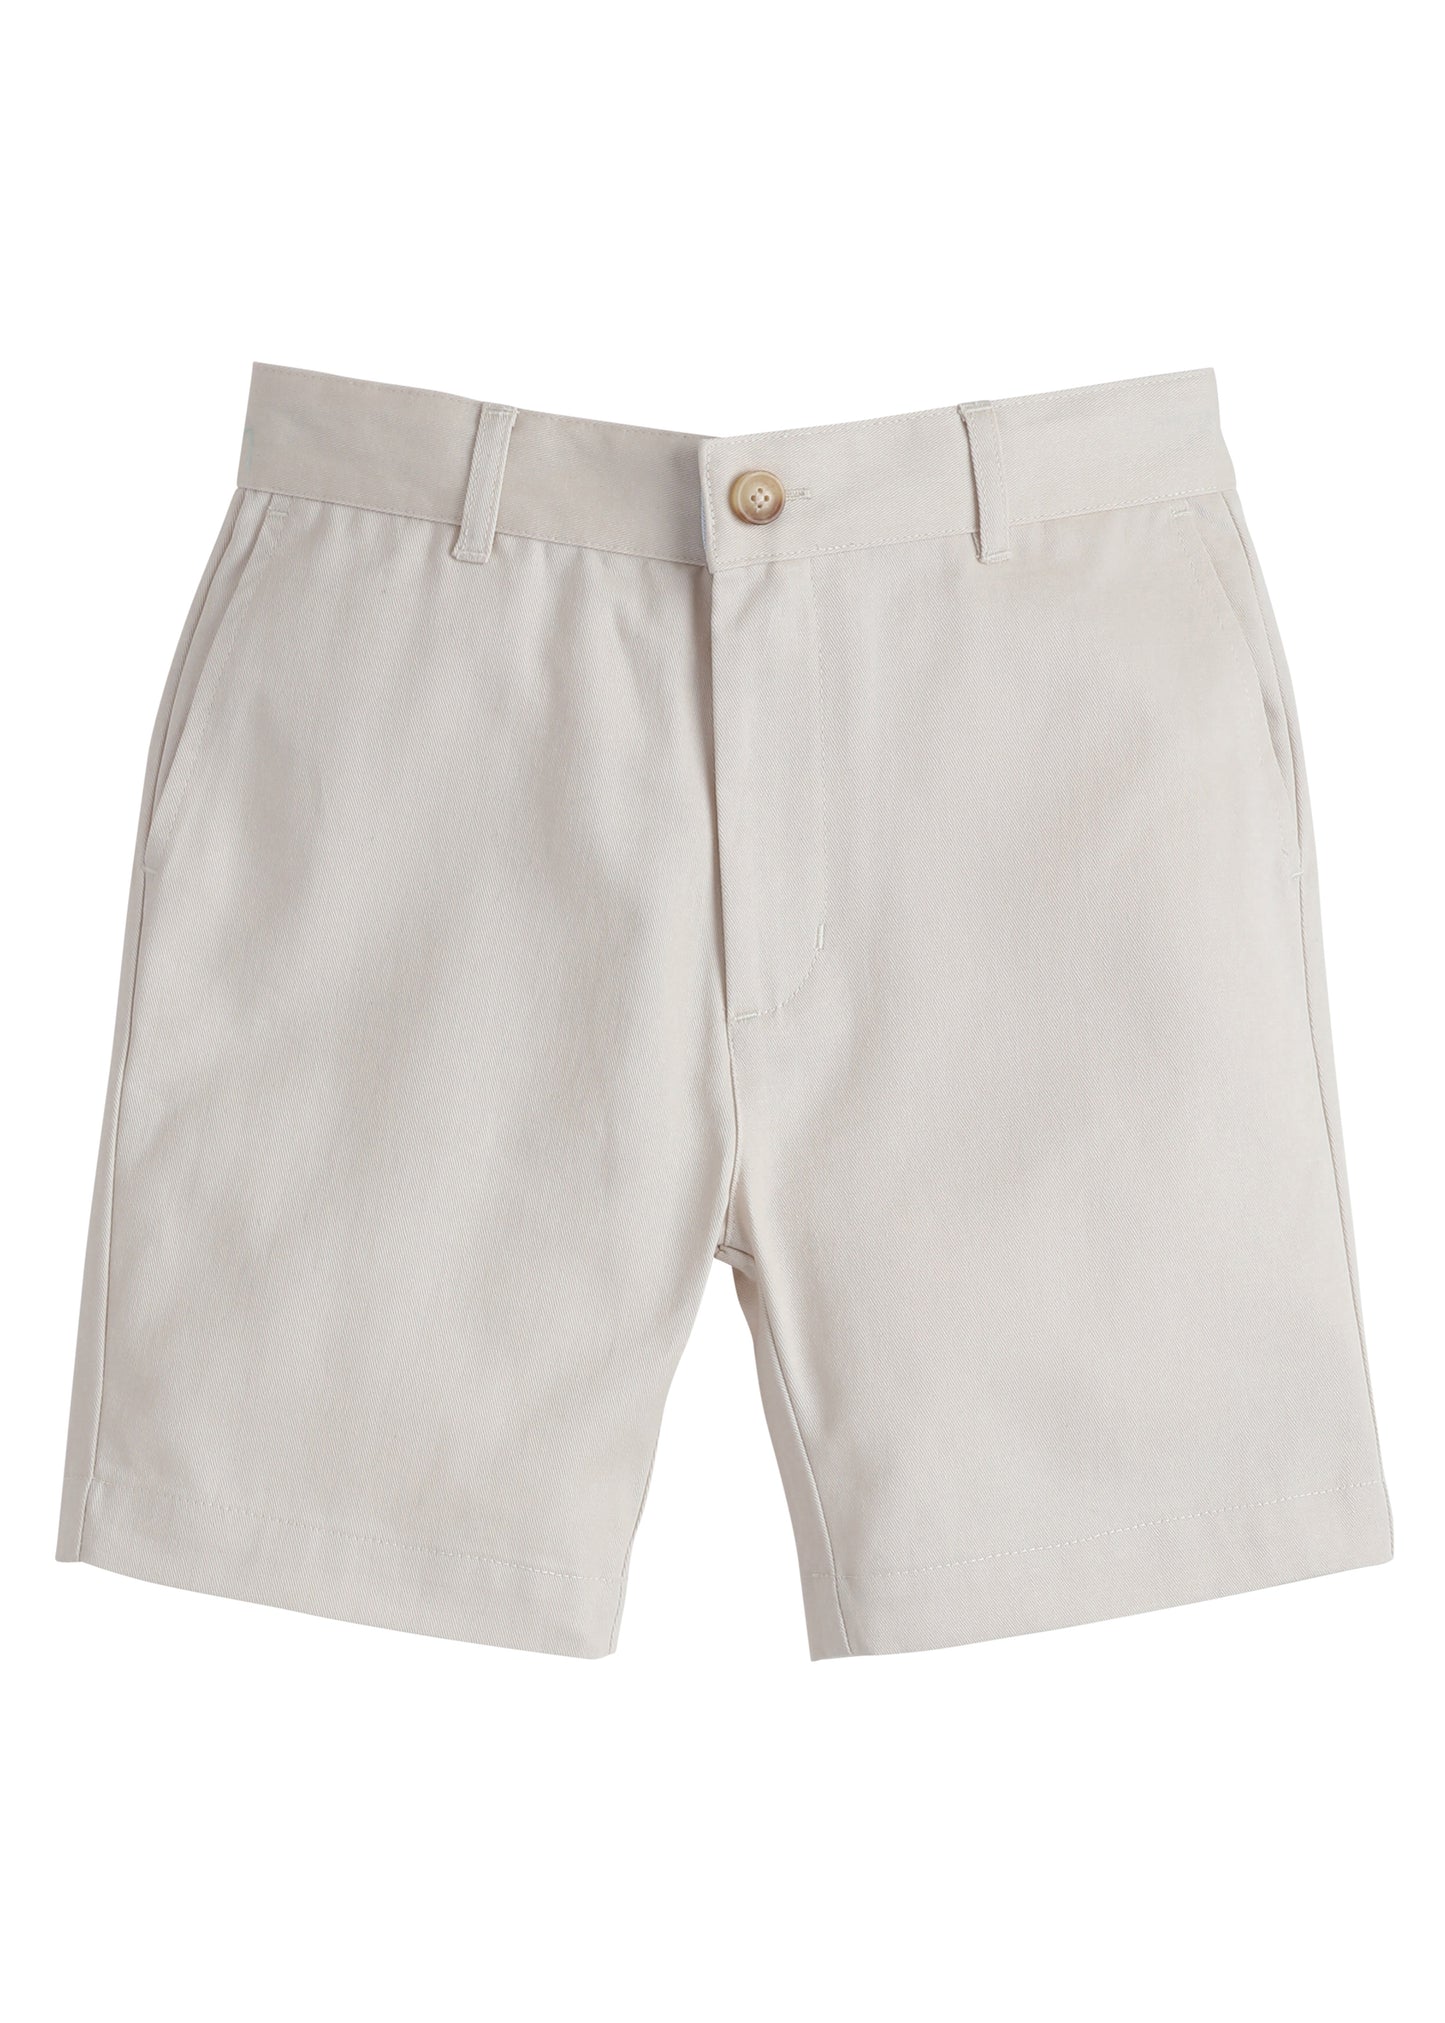 Classic Short in Pebble Twill Twill by Little English